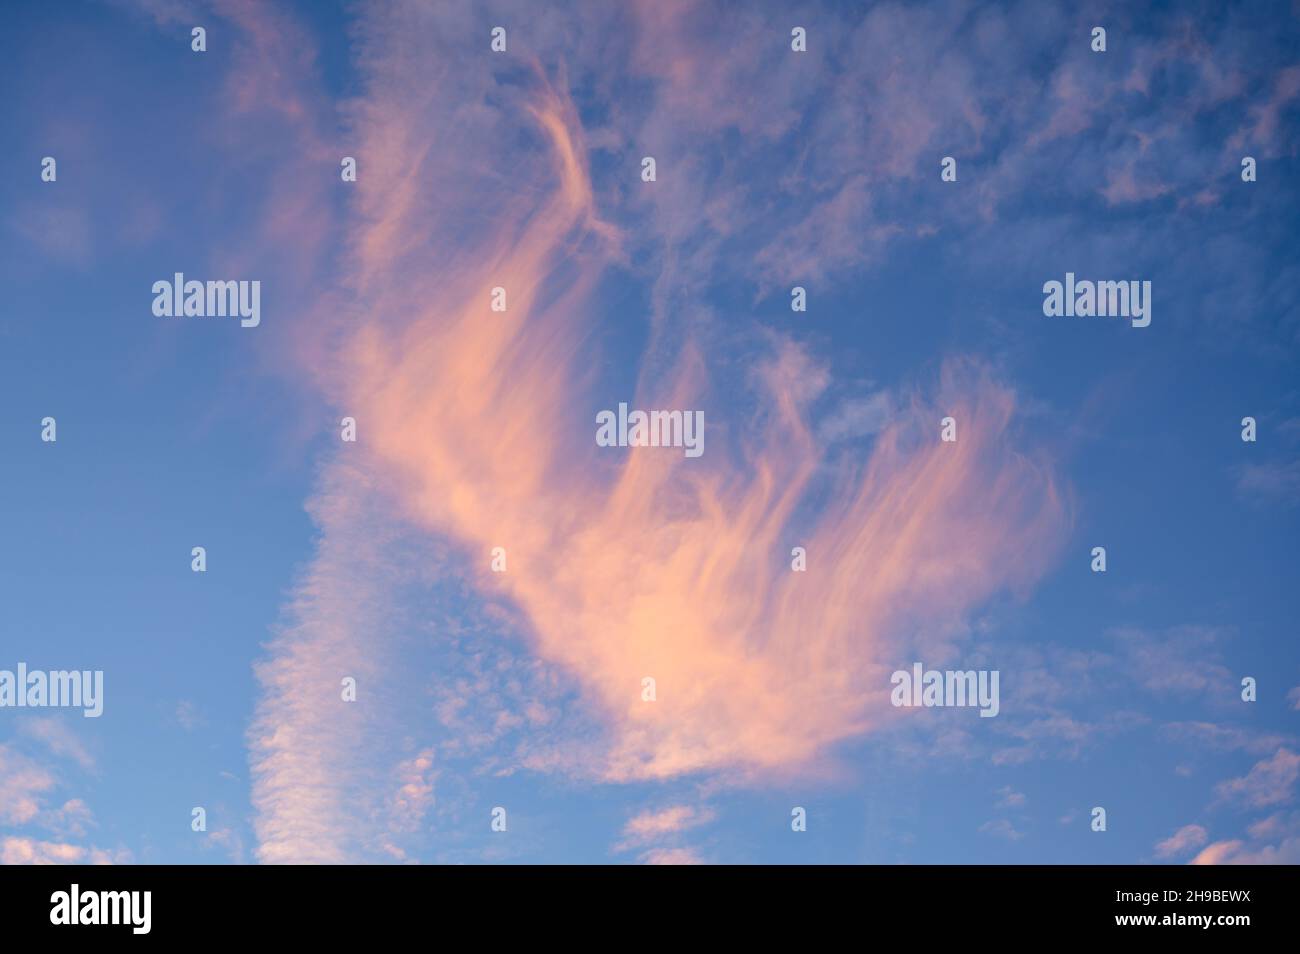 Wispy cloud formation with the morning sun lighting up the clouds with an orange tint. Stock Photo